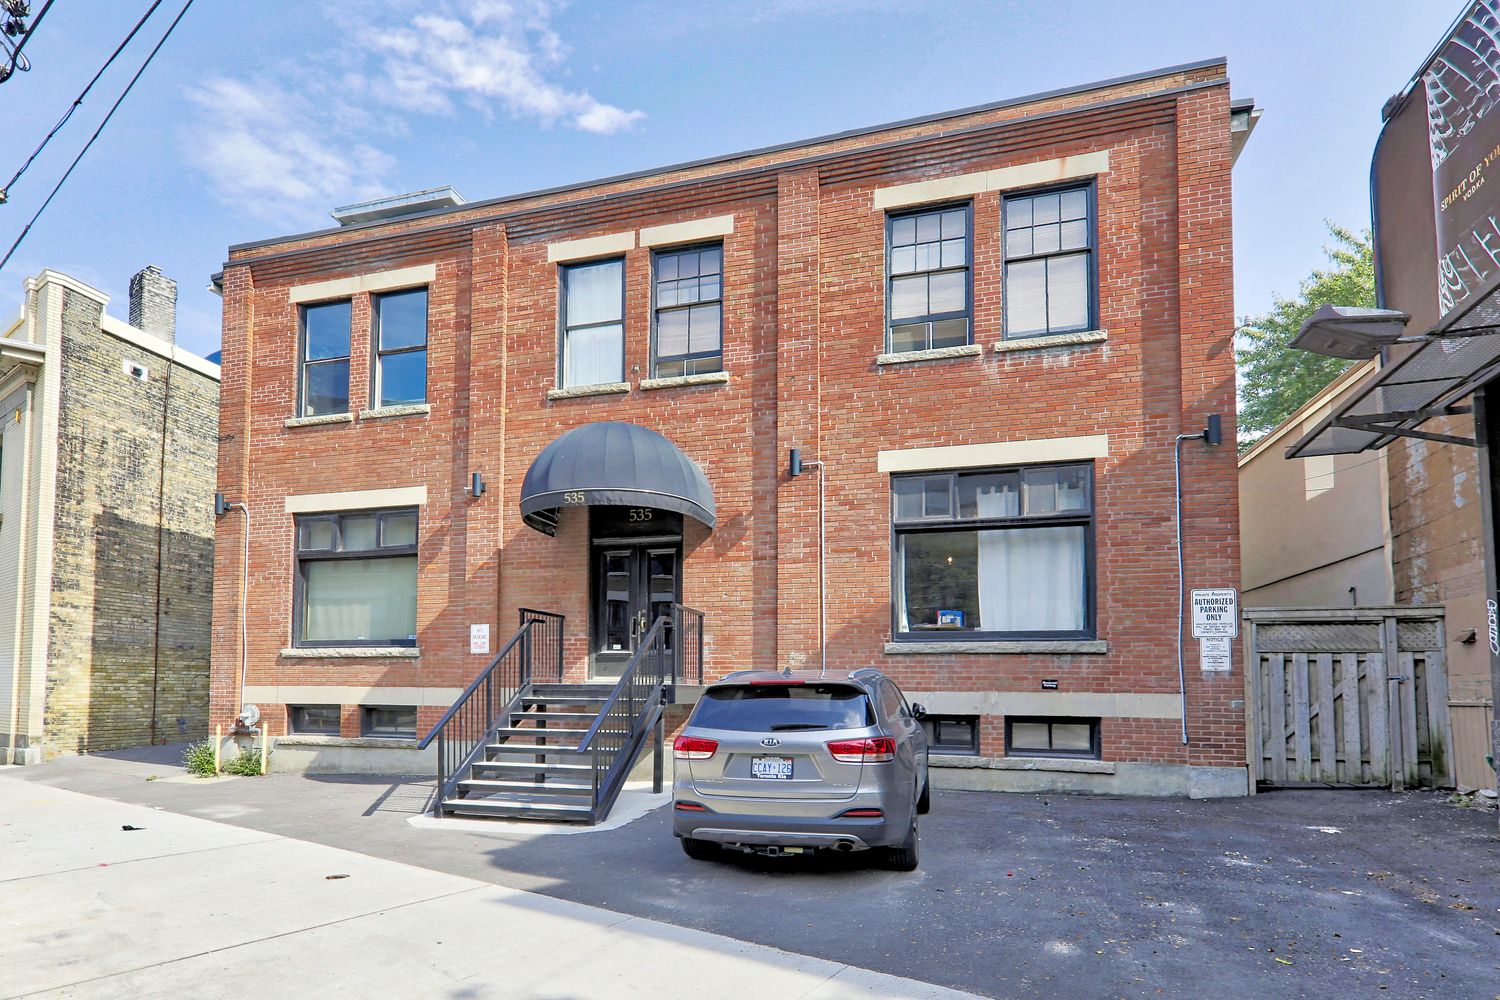 535 Queen Street E. Carhart Lofts is located in  Downtown, Toronto - image #2 of 4